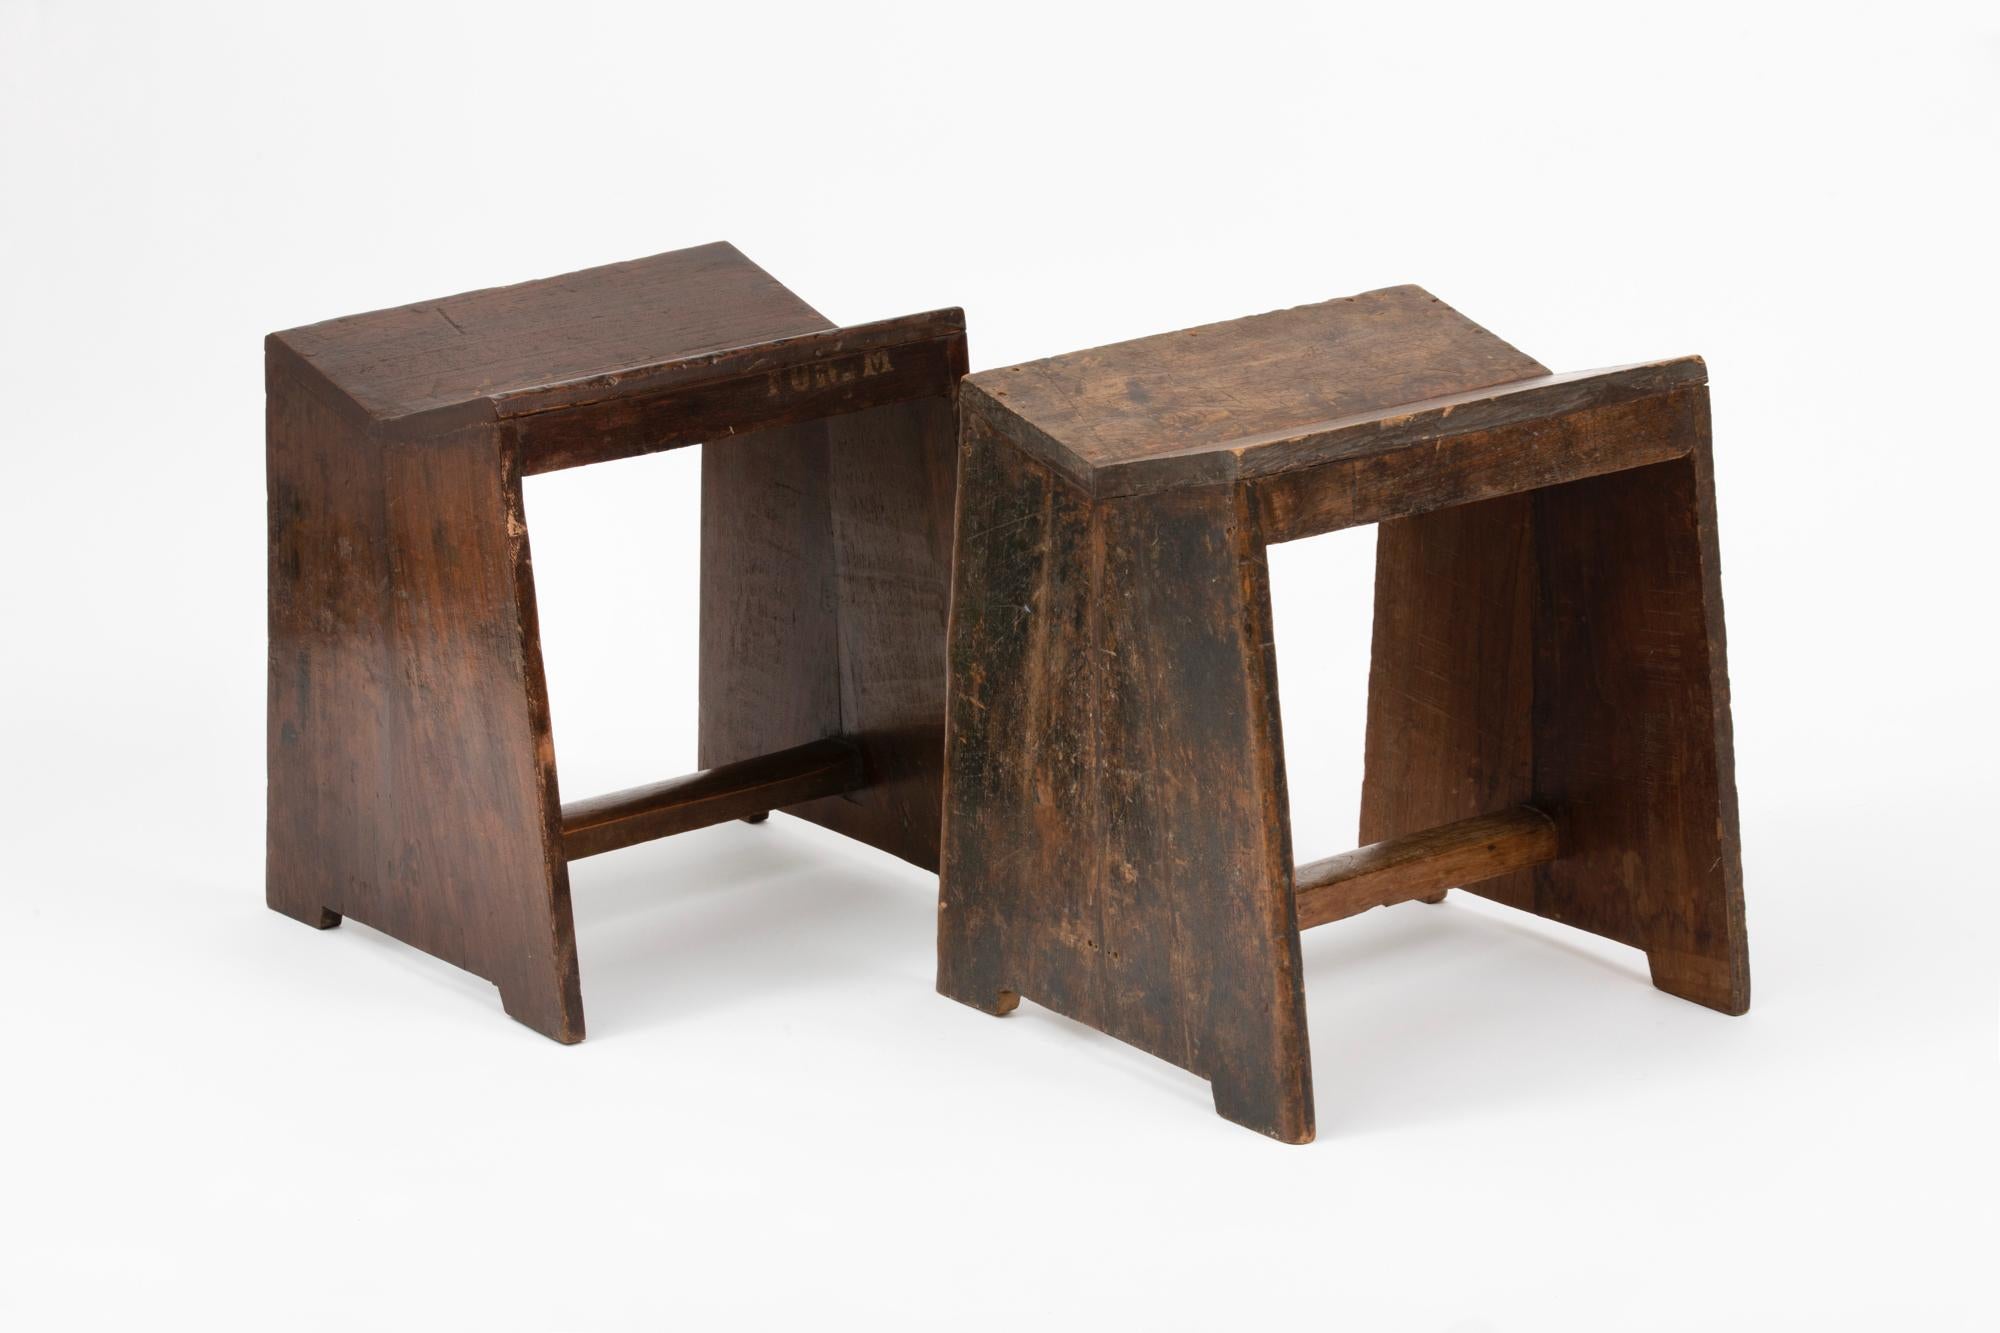 Original architectural teak sewing stools designed by Pierre Jeanneret. These stools were created for the famous modernist capital city of Chandigarh, India that was designed by Le Corbusier, Jeanneret, and their team. Model number PJ-SI-68-A. The